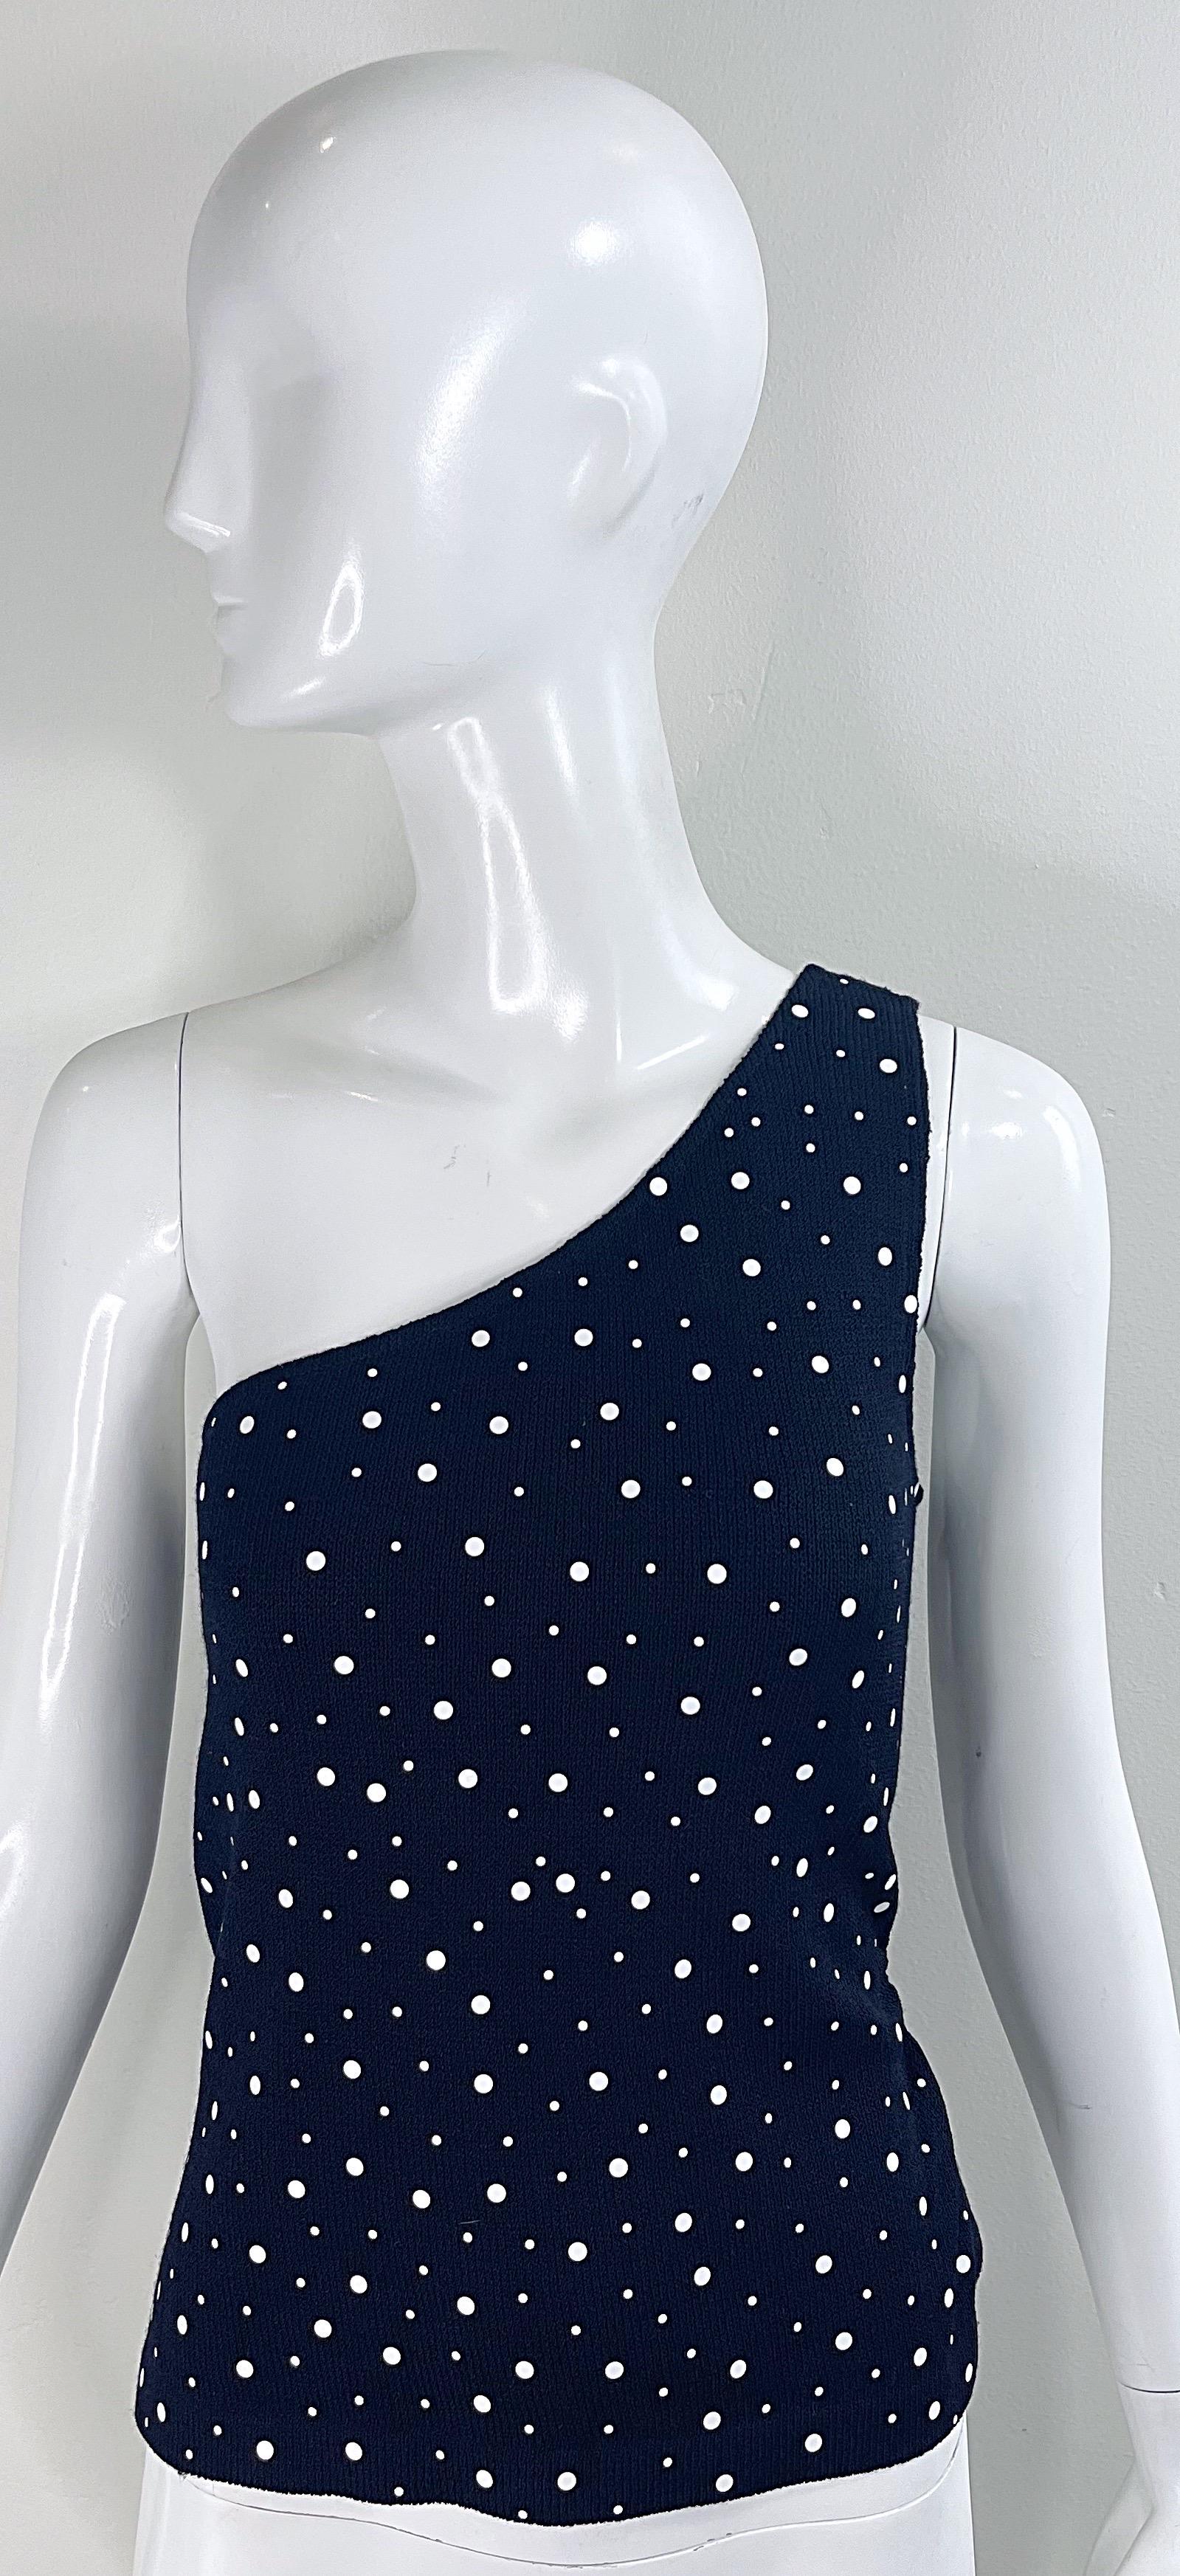 NWT 1990 I. Johns Collection by Marie Gray Size 8 Black White Polka Dot Top Neuf - En vente à San Diego, CA